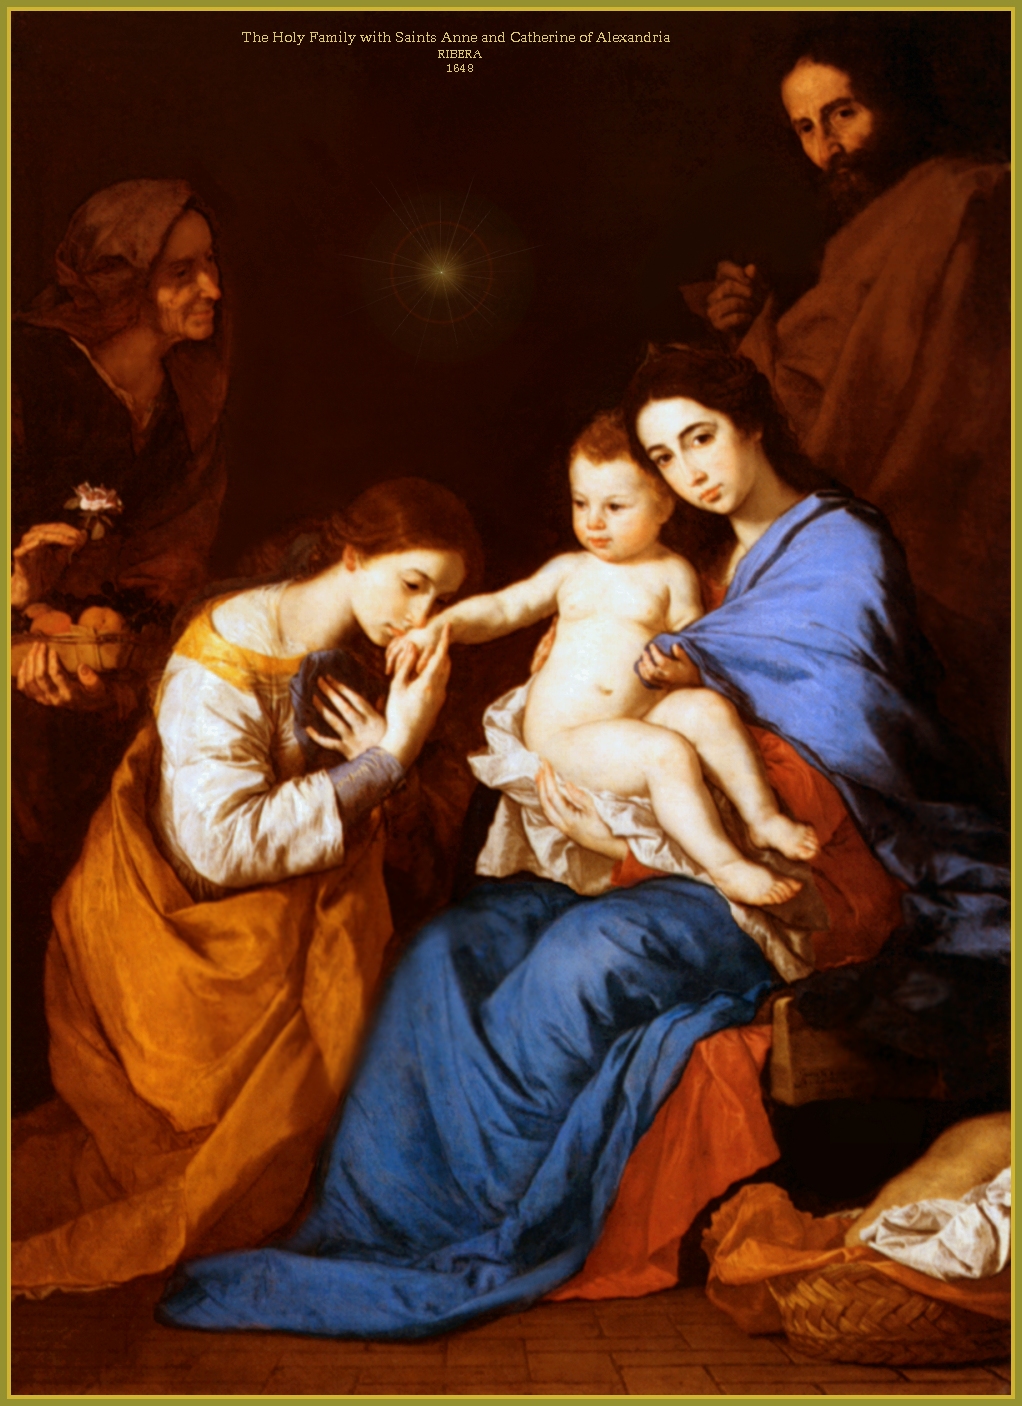 HOLY FAMILY WITH SAINTS ANNE AND CATHERINE